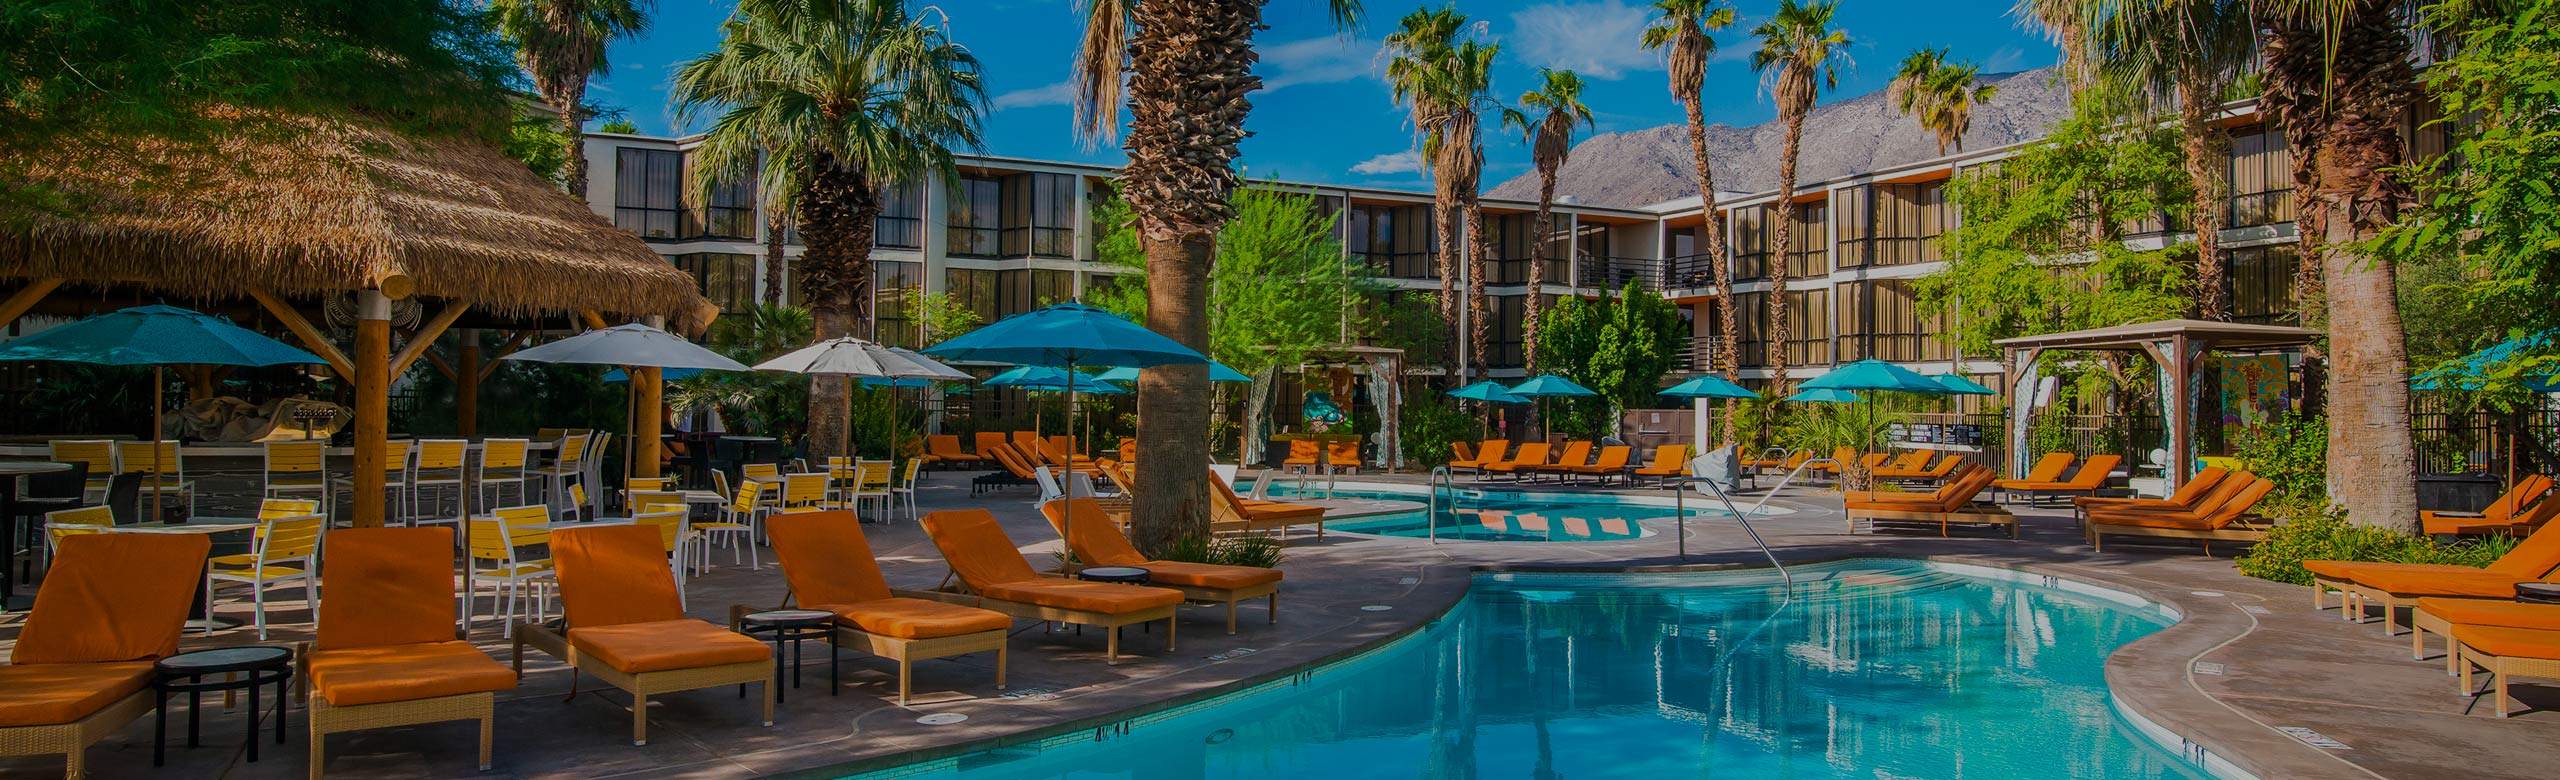 Resort in sunny Palm Springs with a large pool, which is powered by cogeneration